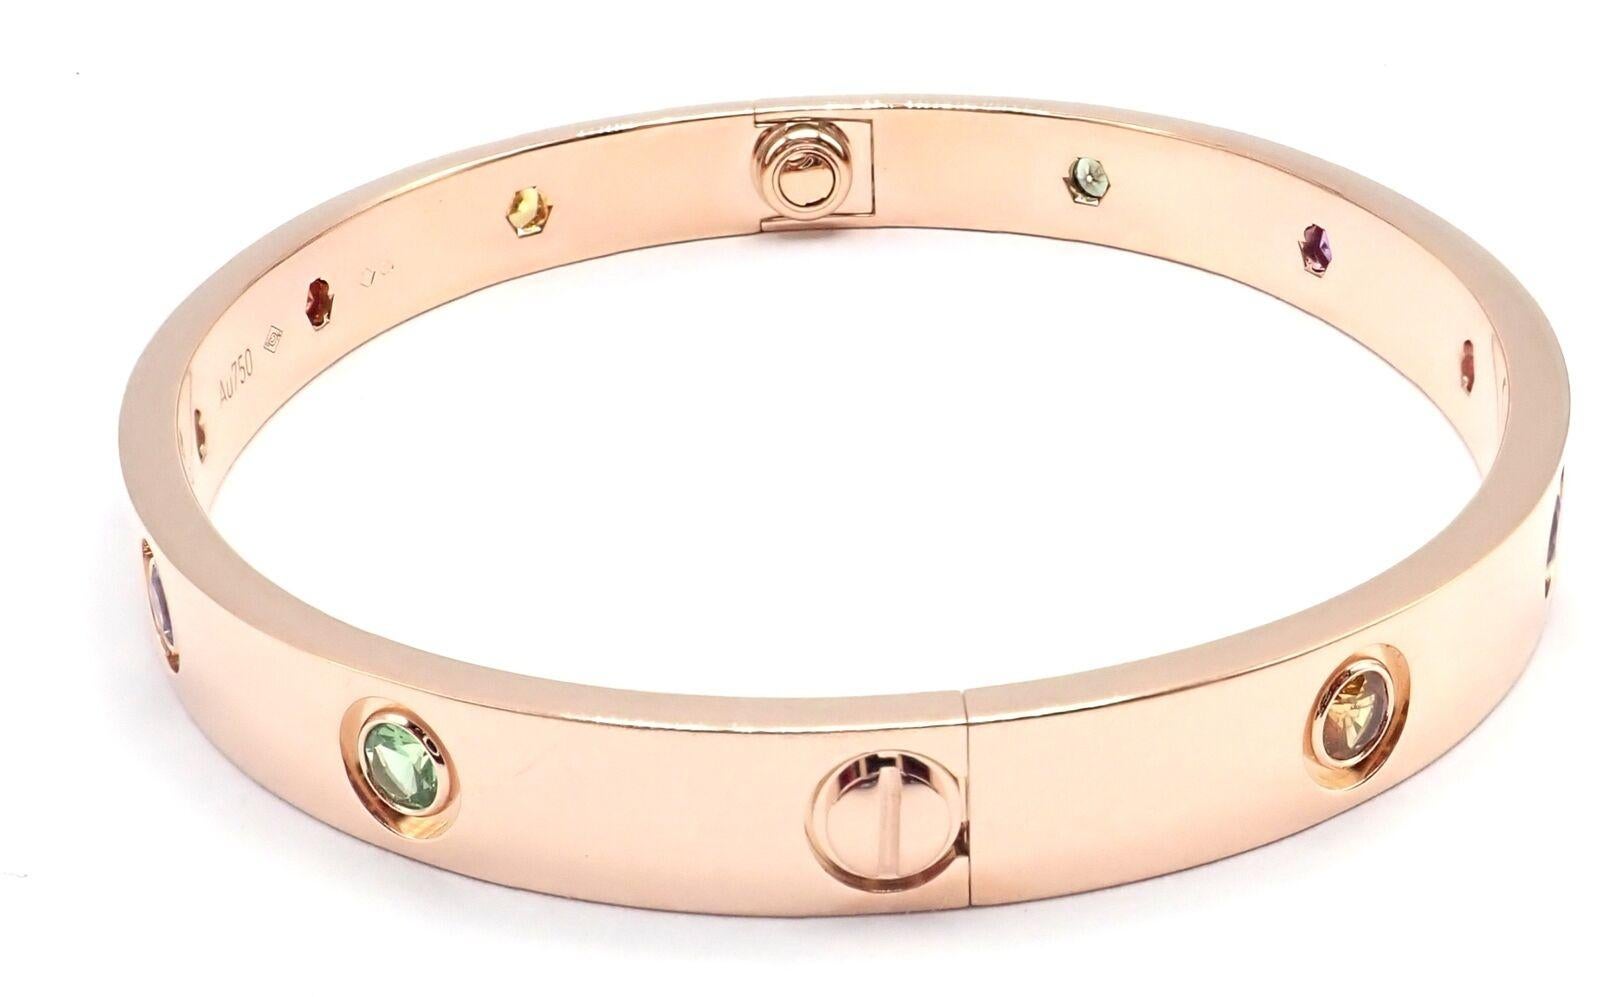 18k Rose Gold Color Stone LOVE Bangle Bracelet Size 17 by CARTIER. This bracelet comes with service paper from Cartier store, Cartier box and a screwdriver.
This bracelet has a new style screw system.
With 2 yellow sapphires, 2 pink sapphires,
2